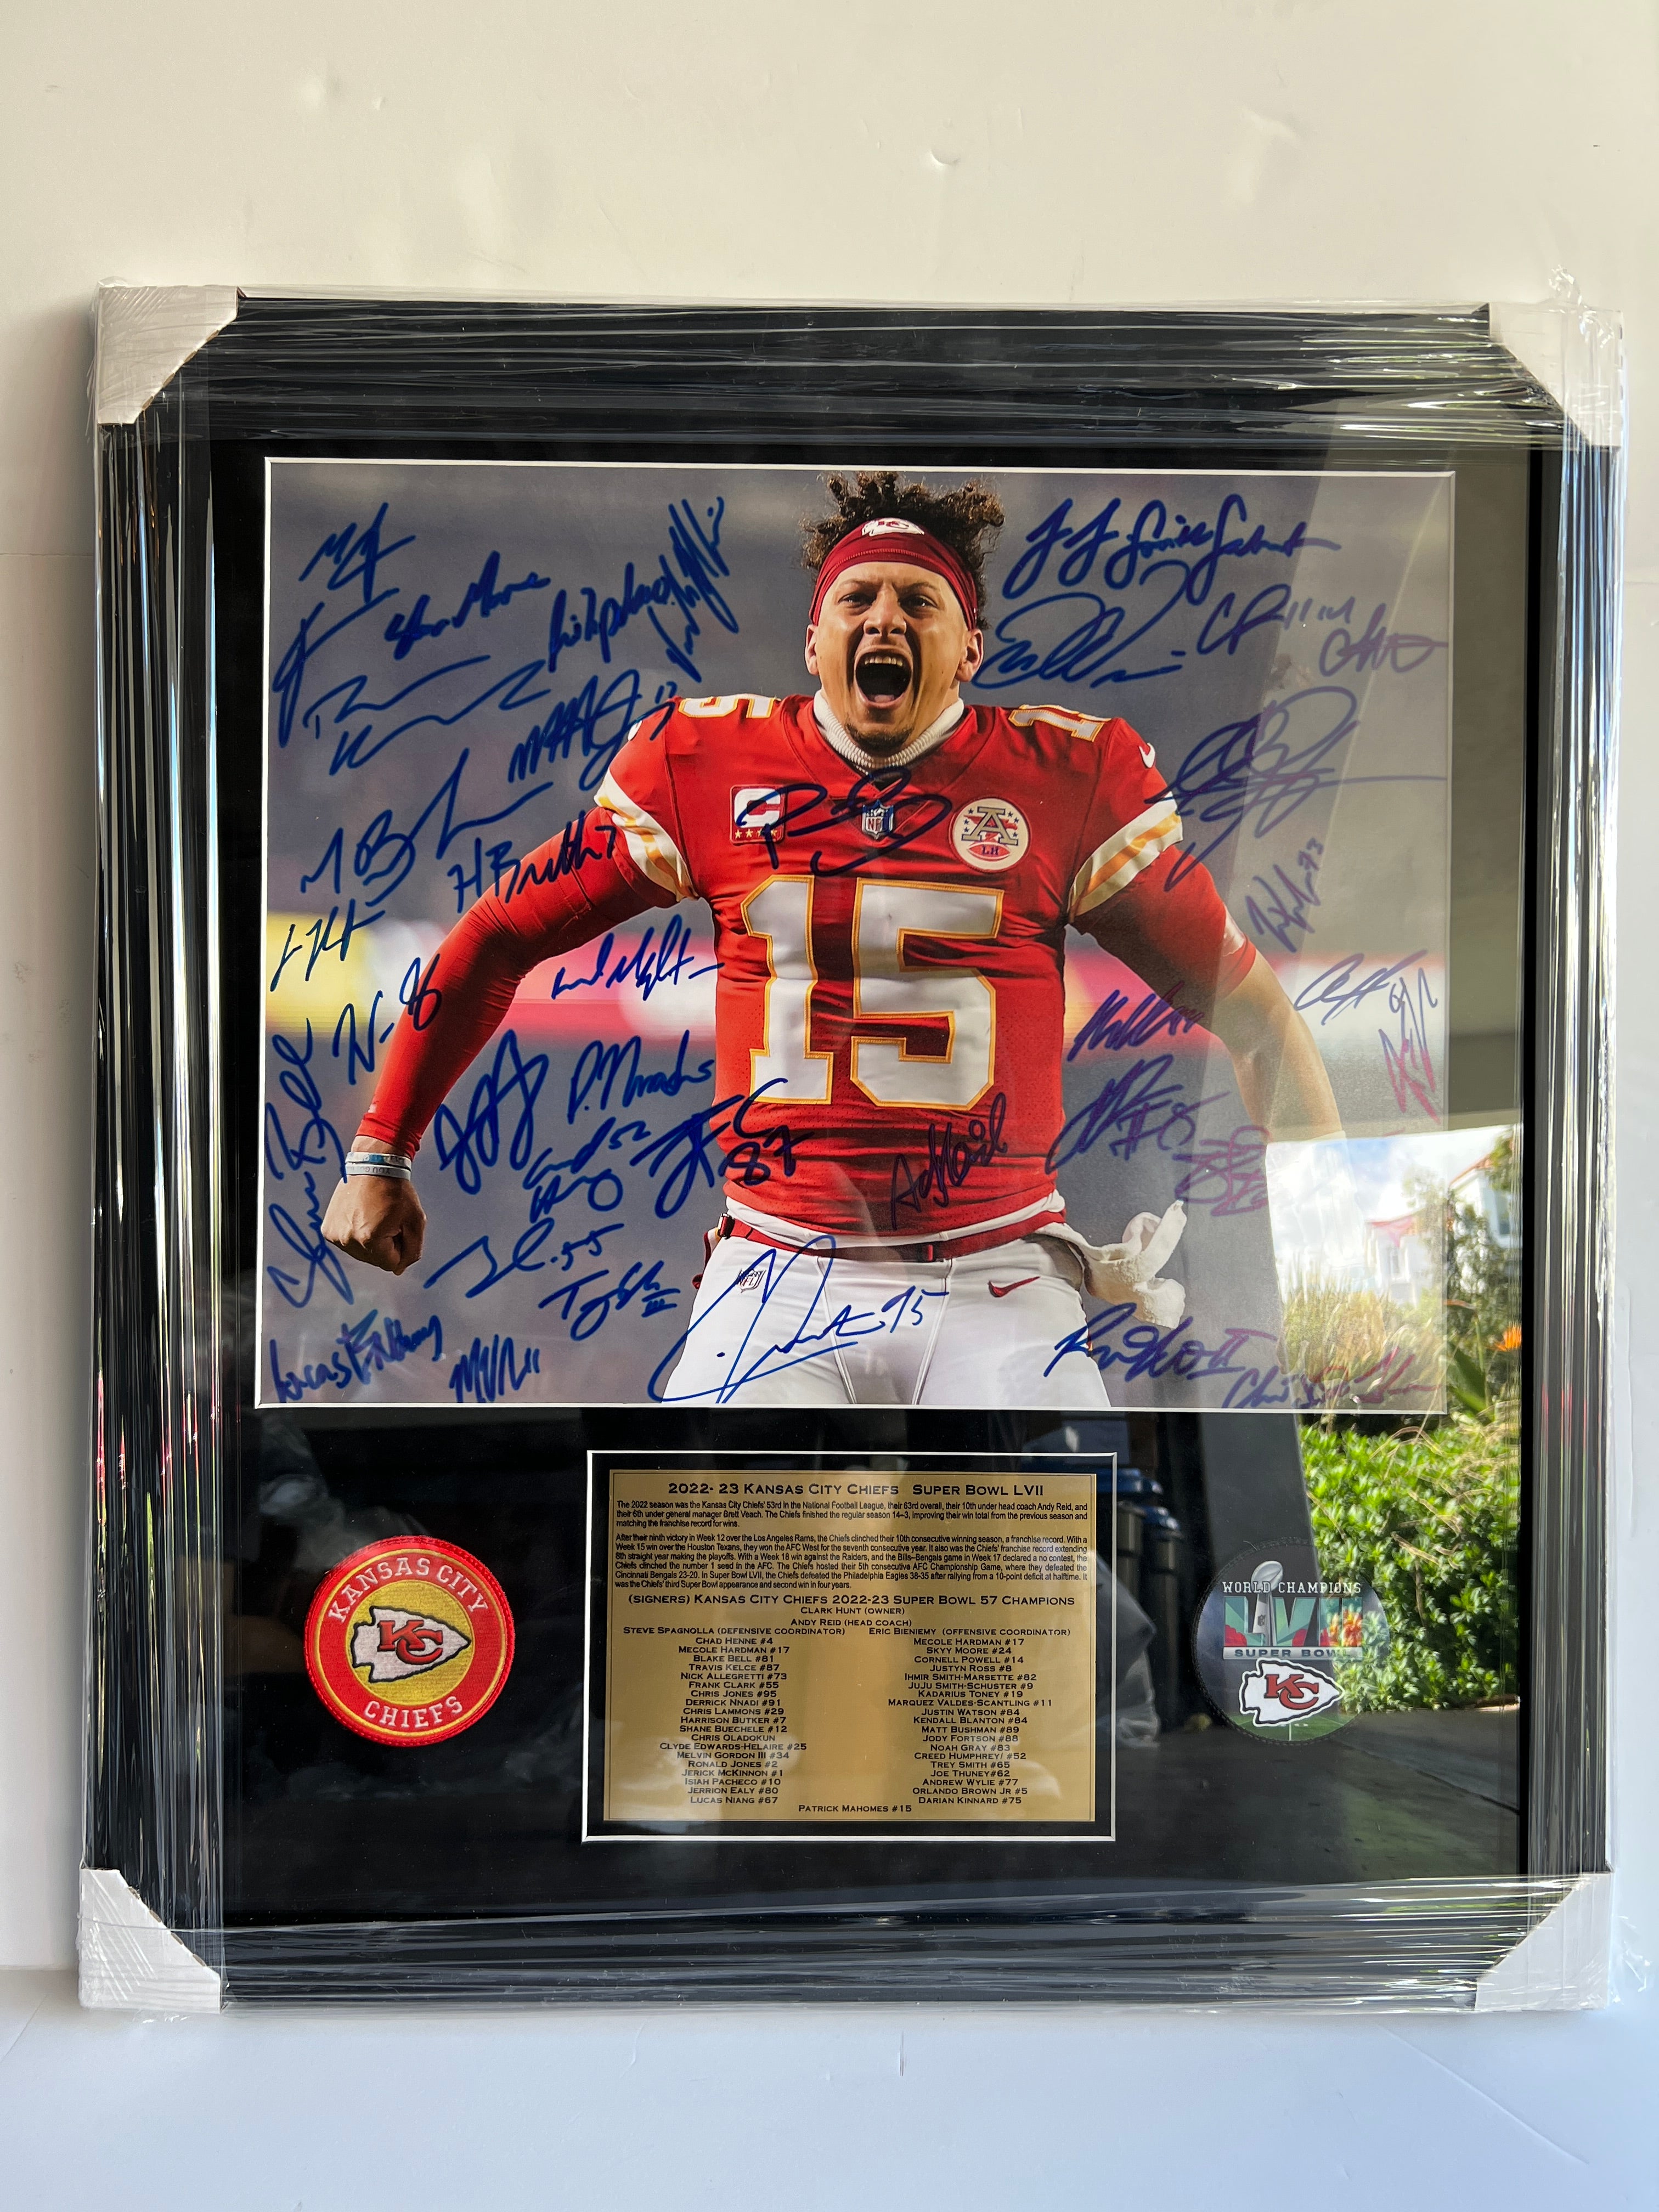 Patrick Mahomes, Andy Reid, Travis Kelce Super Bowl LVII NFL champions 16x20 photo team signed framed 28x25 with proof